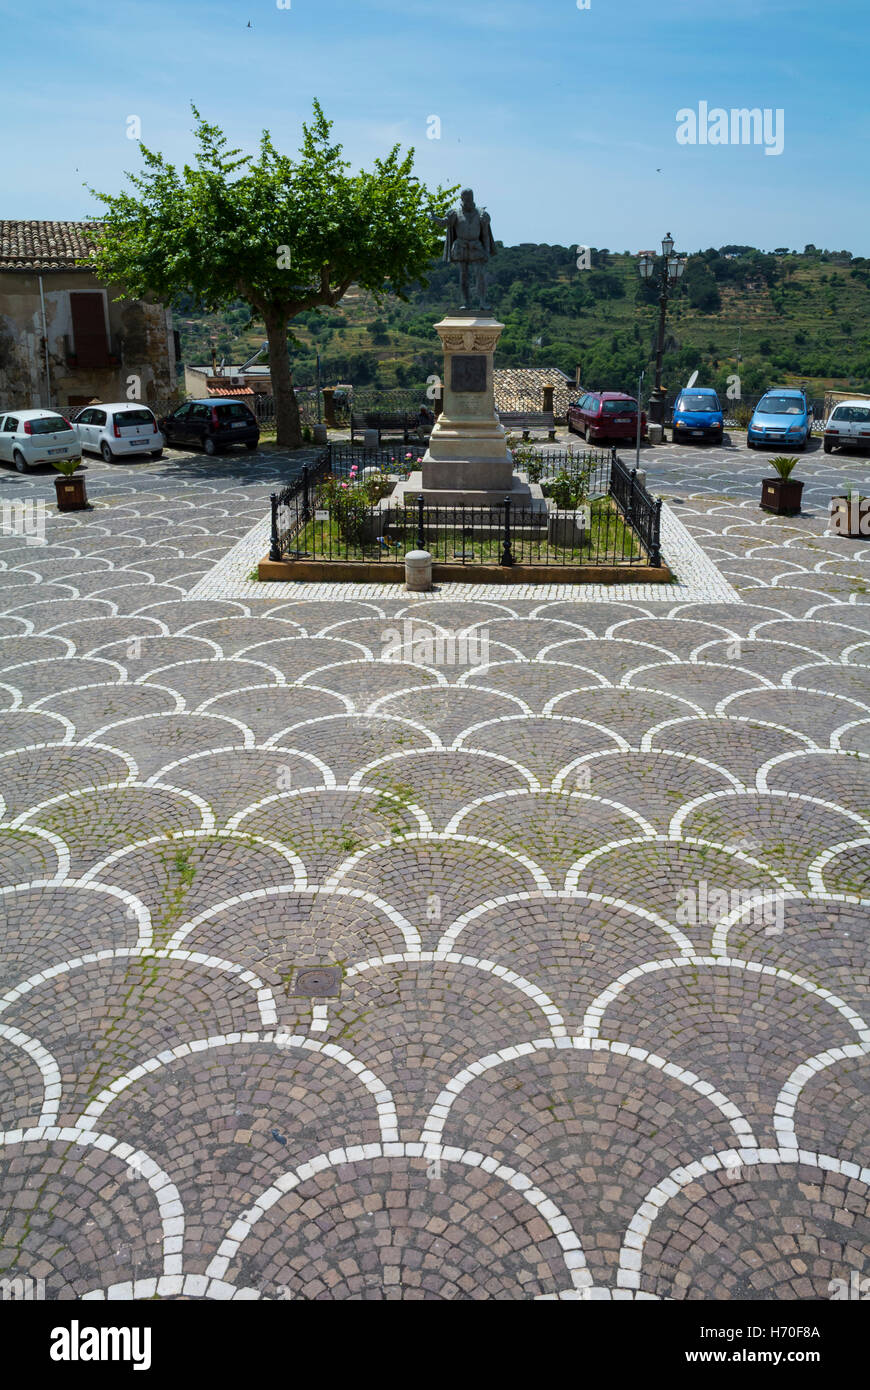 Piazza Armerina, Enna, Italy, Mosaic pavement Piazza Armerina that is developed during the Norman domination in Sicily (11th century Stock Photo